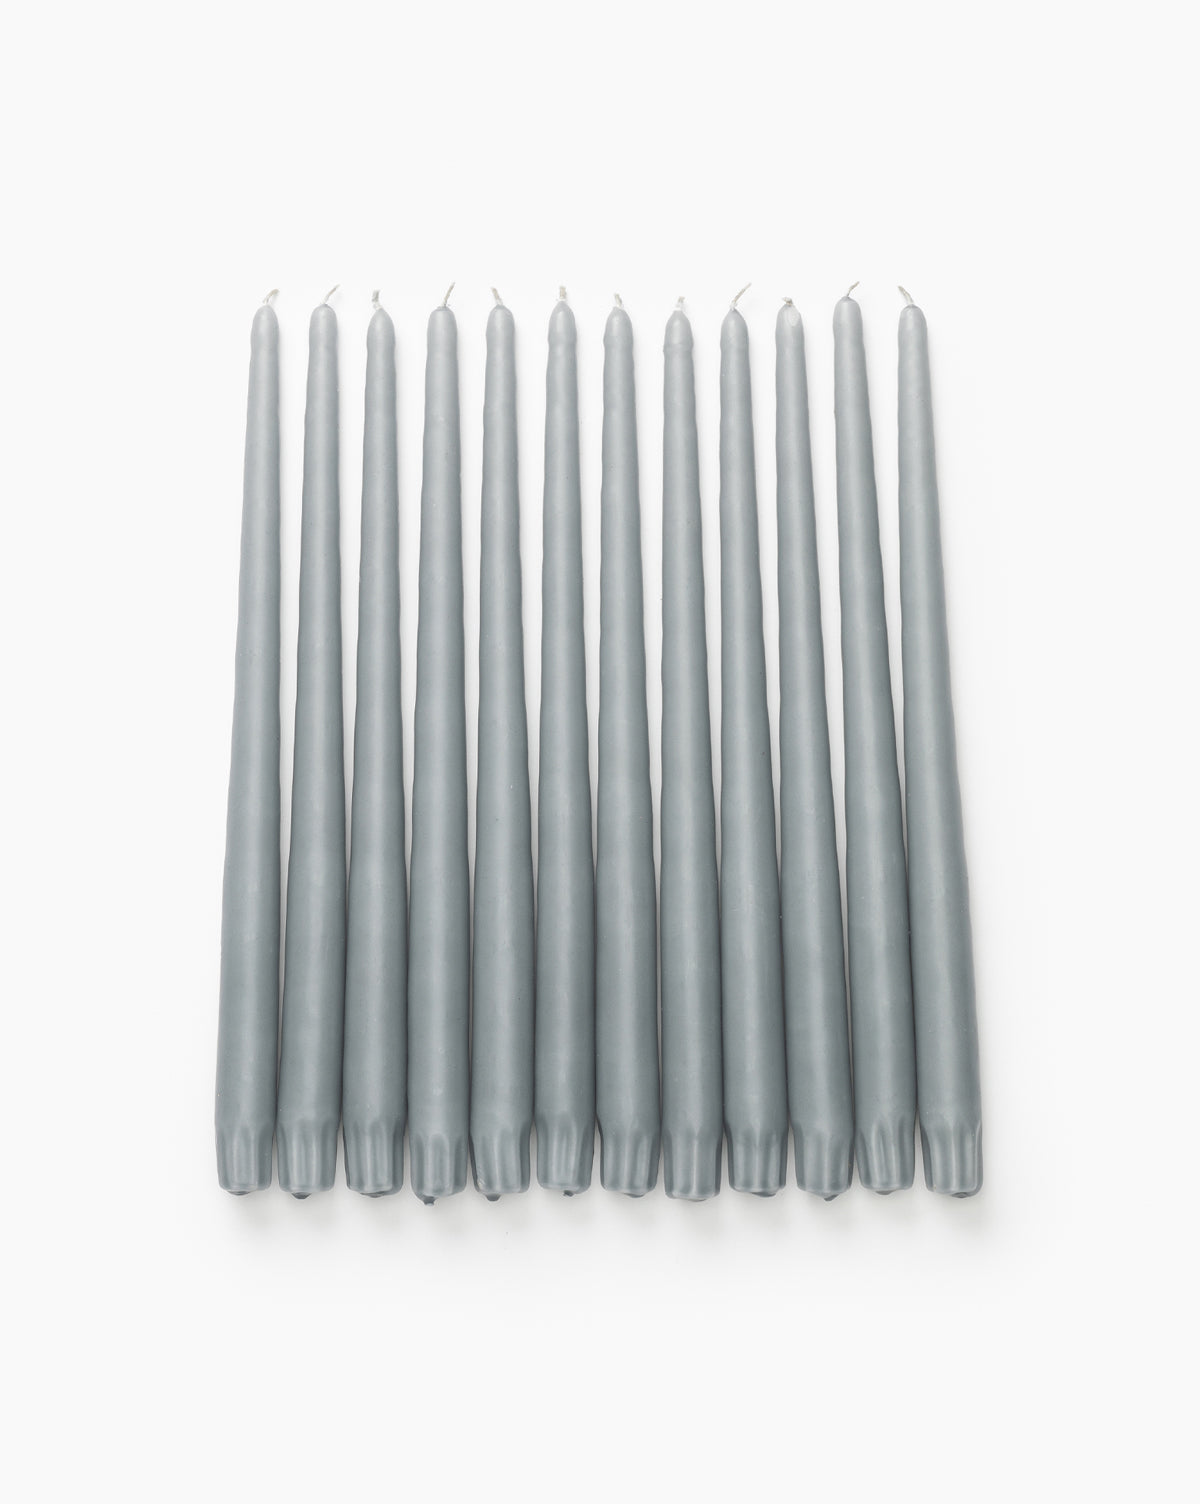 Yummi Candles, Light Gray Taper Candles(Set of 12)